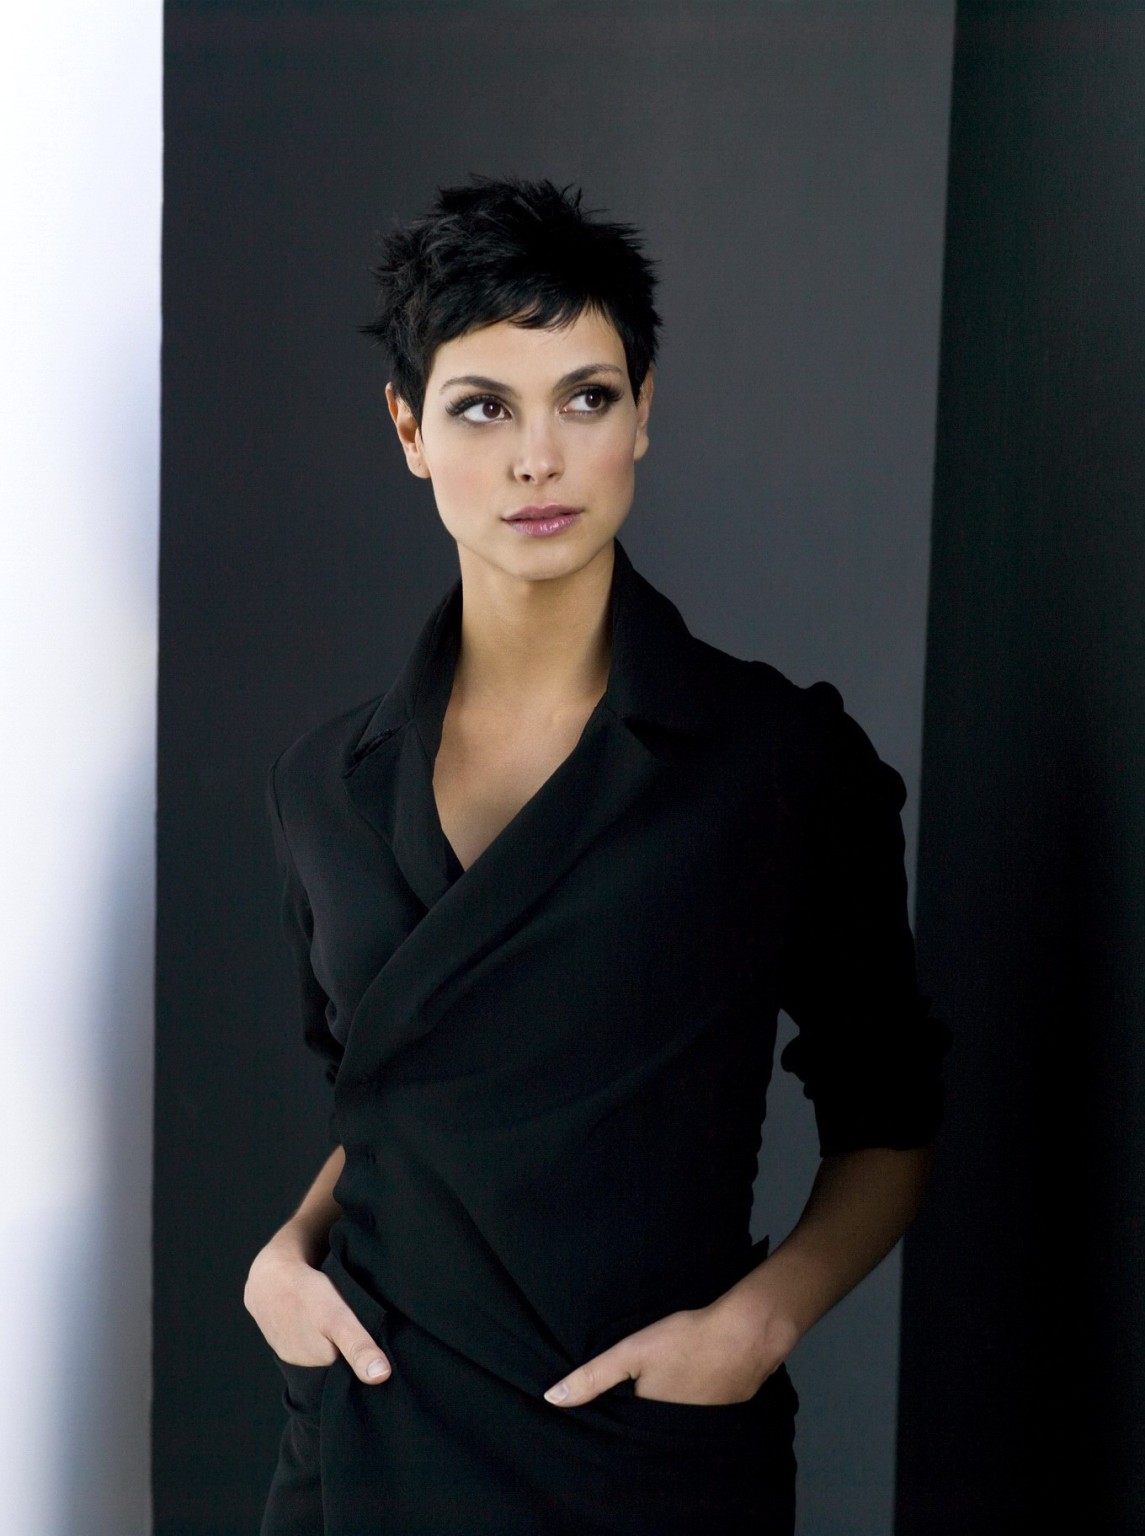 Morena Baccarin looking very hot in the V promotional shoot #75195037